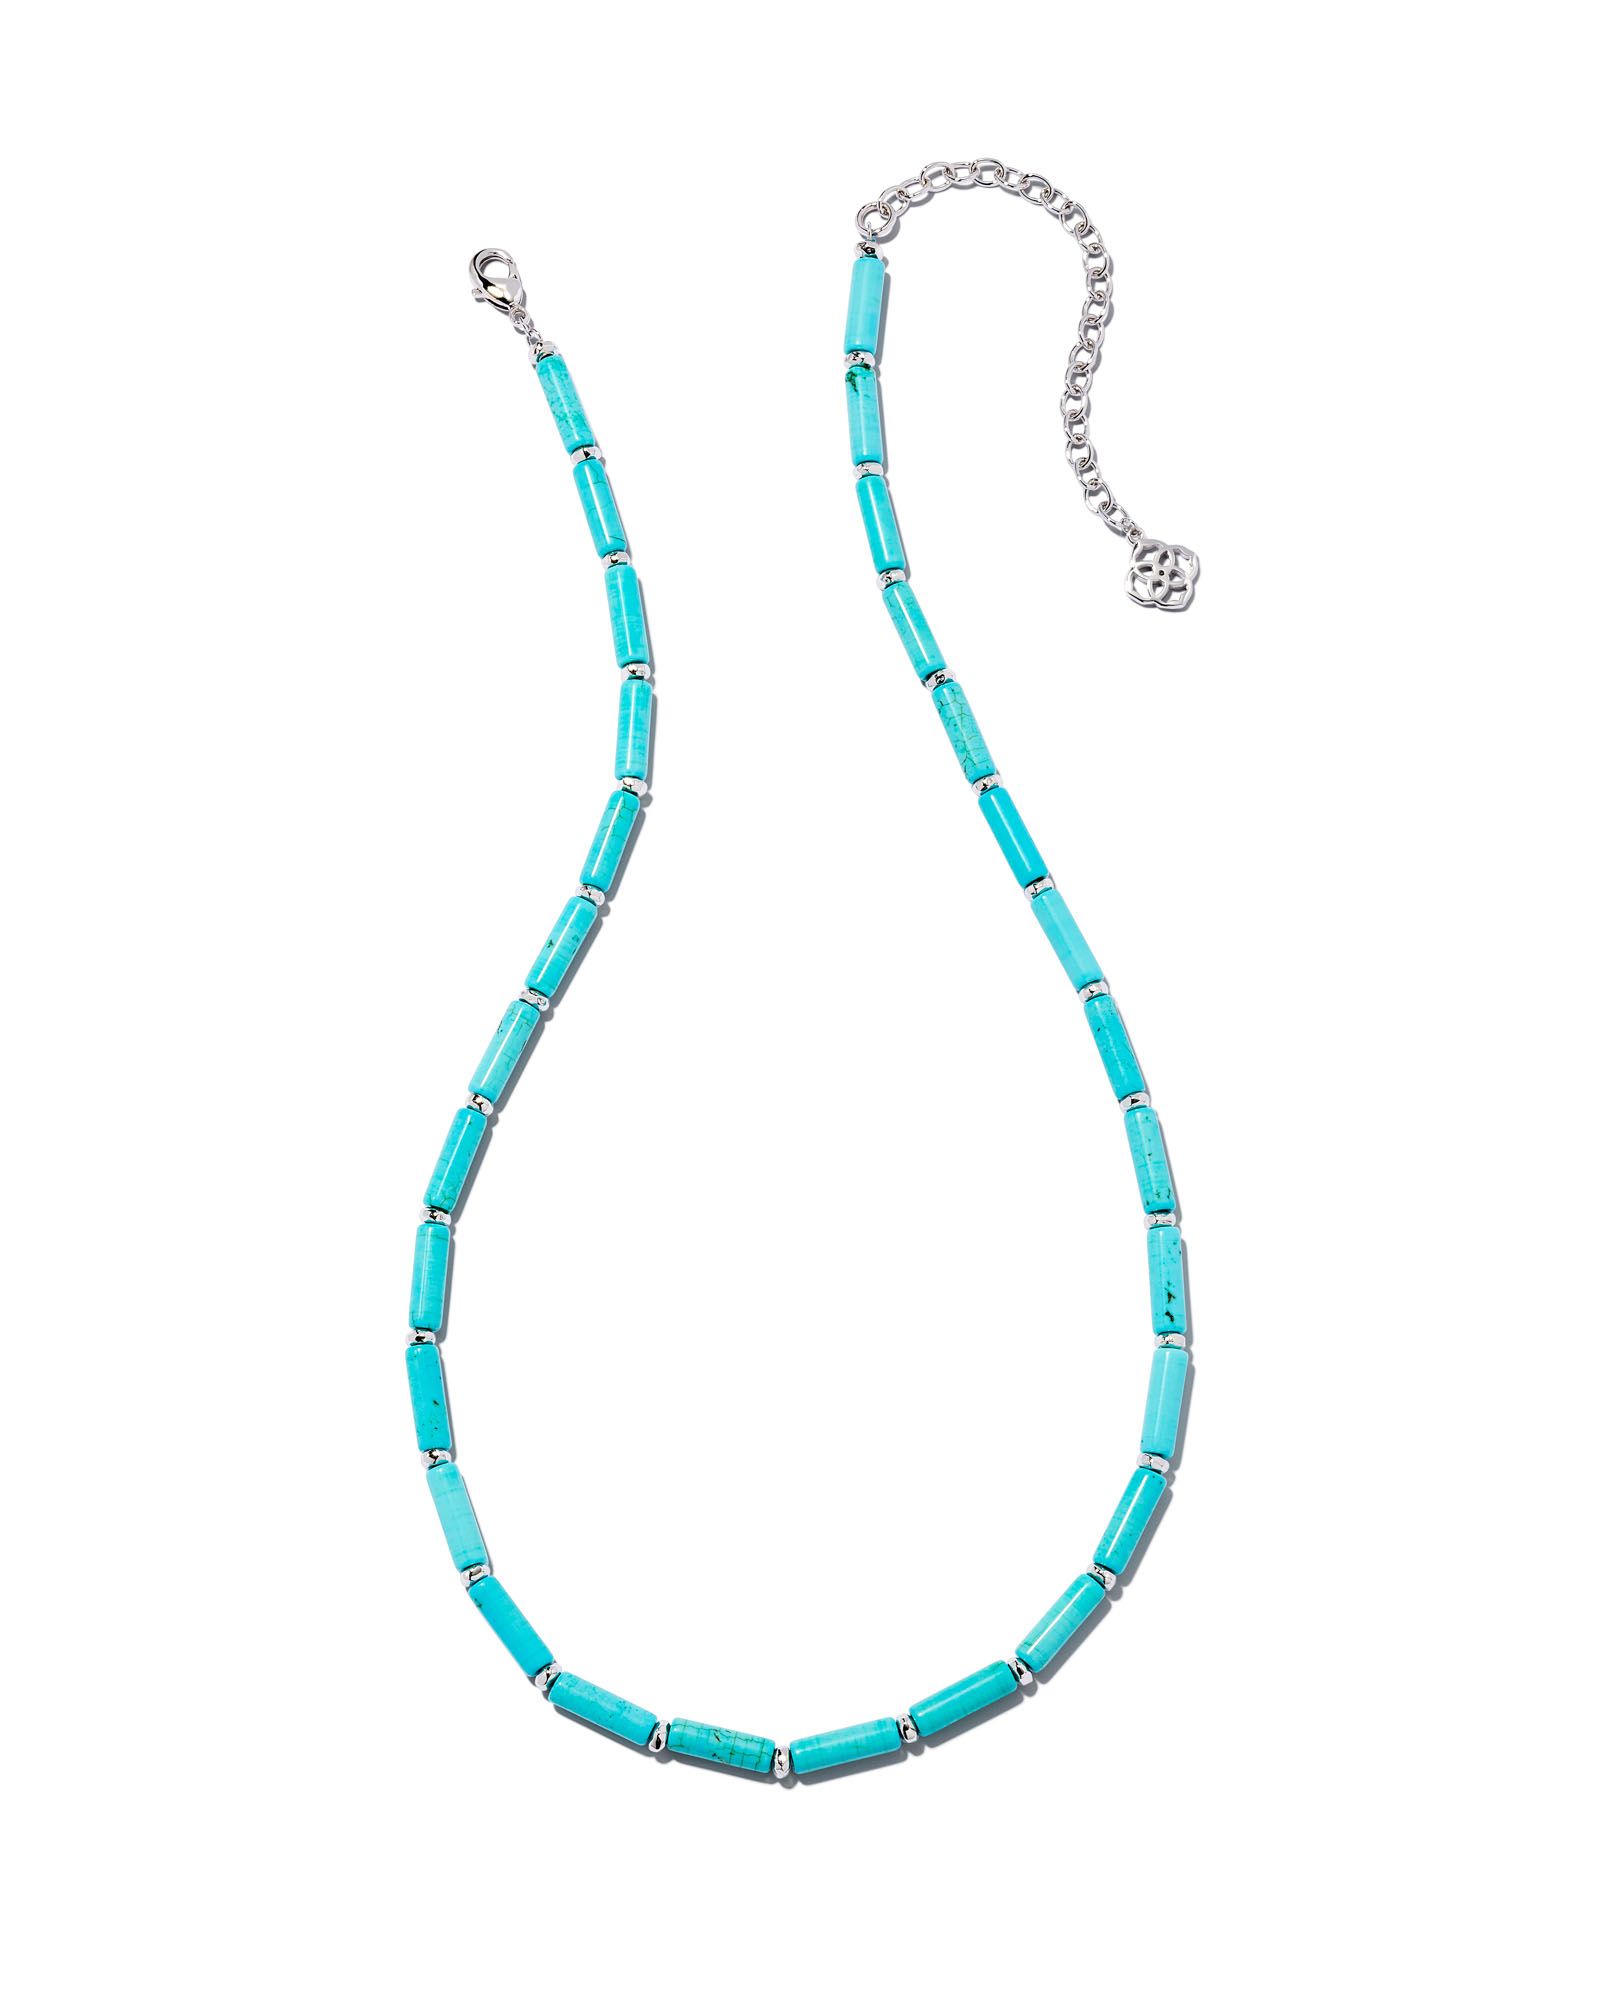 Ember Silver Strand Necklace in Variegated Turquoise Magnesite | Kendra Scott | Kendra Scott